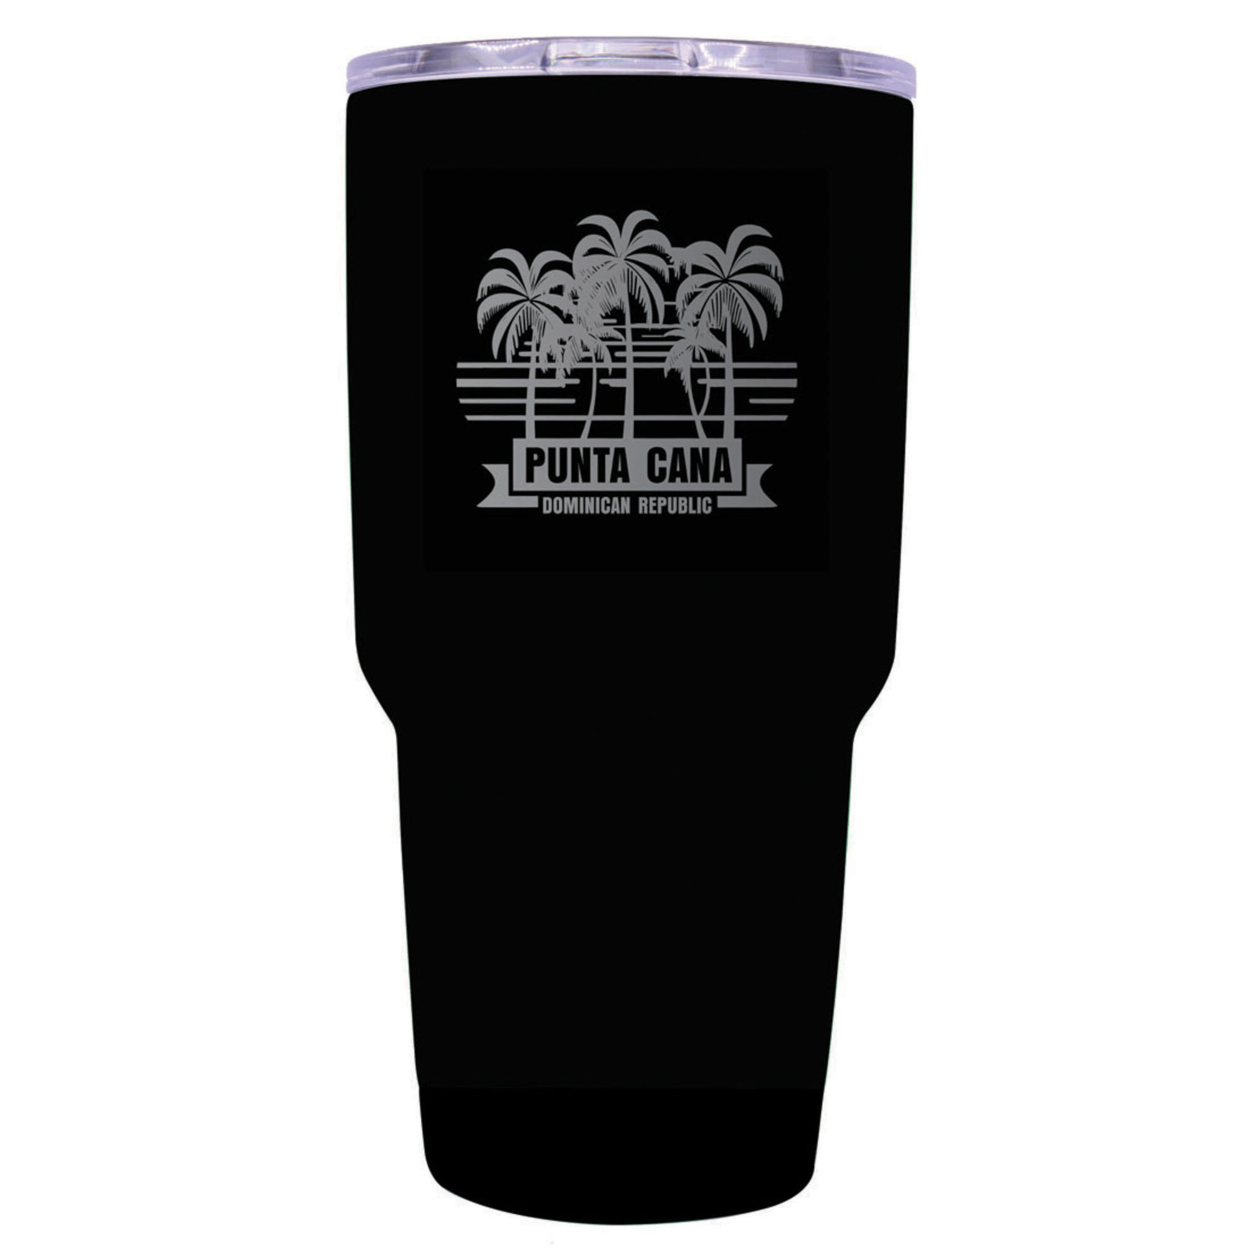 Punta Cana Dominican Republic Souvenir 24 Oz Insulated Stainless Steel Tumbler Etched - White, PALM BEACH